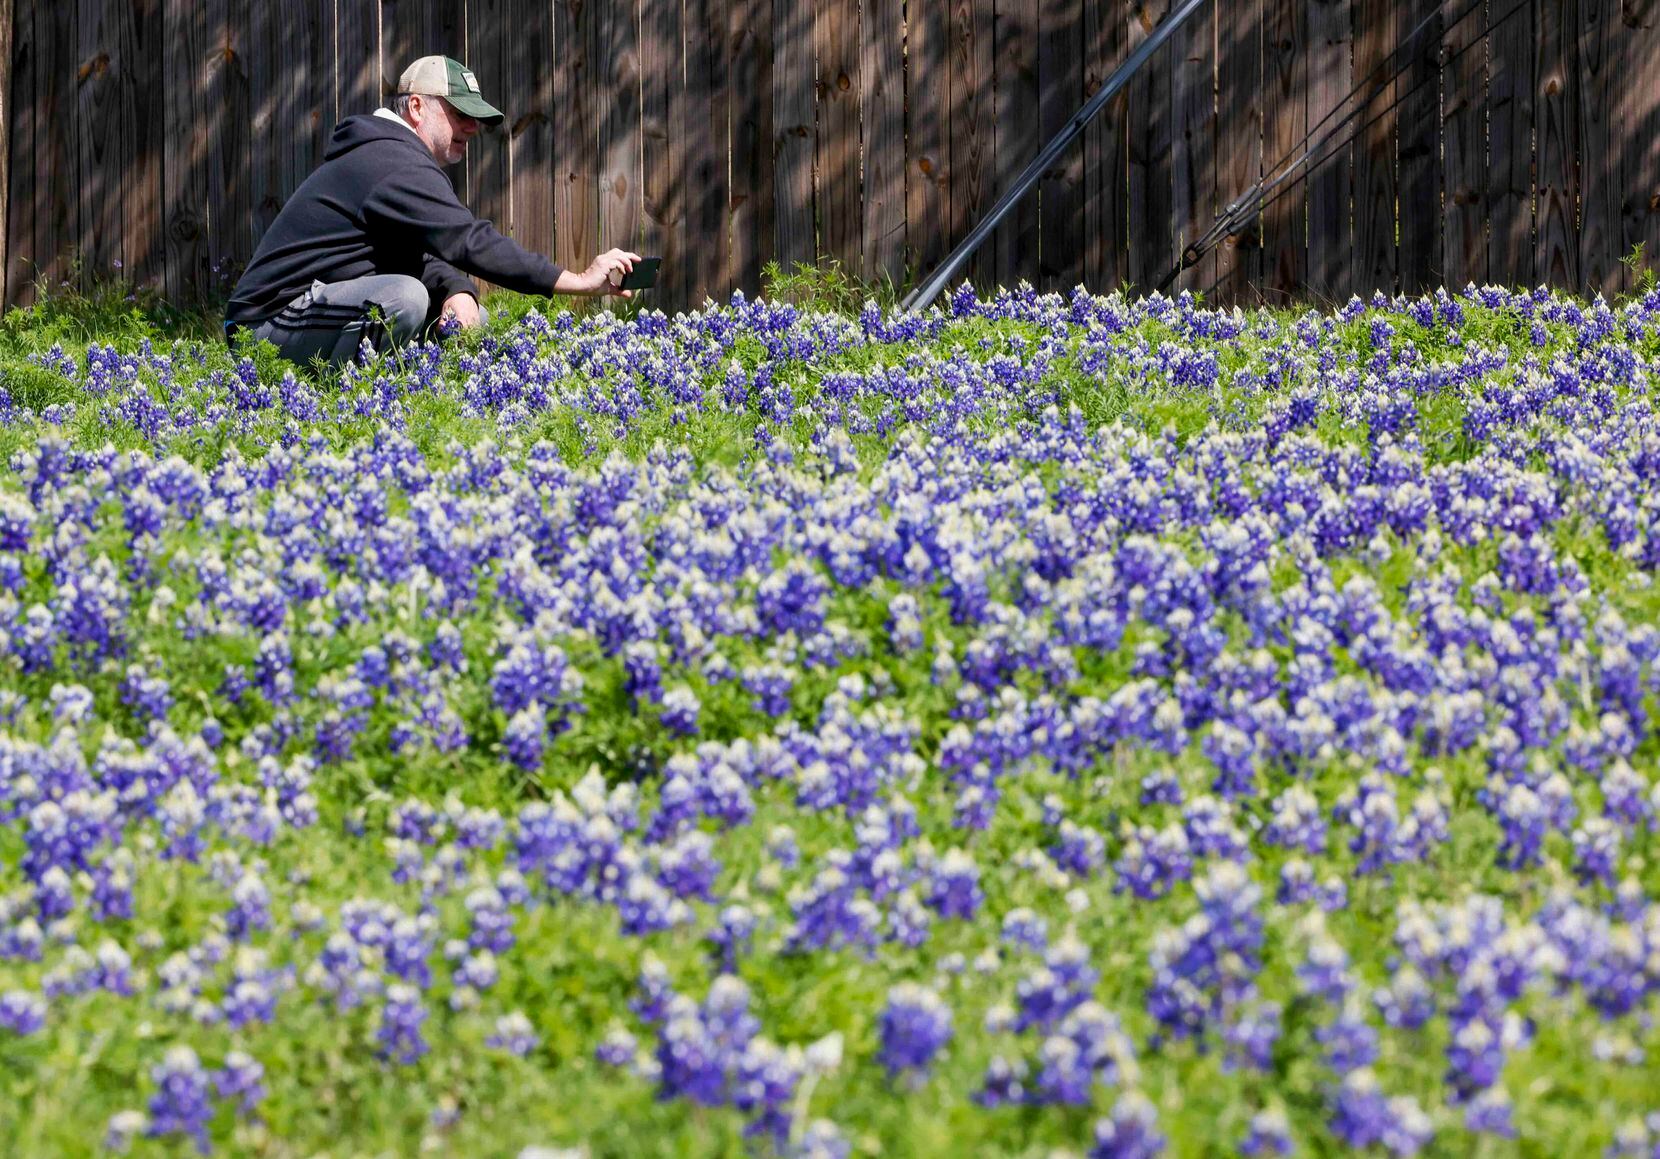 Greg Johnson, visiting from Missouri, takes photos of bluebonnets at the Bluebonnet Trail on...